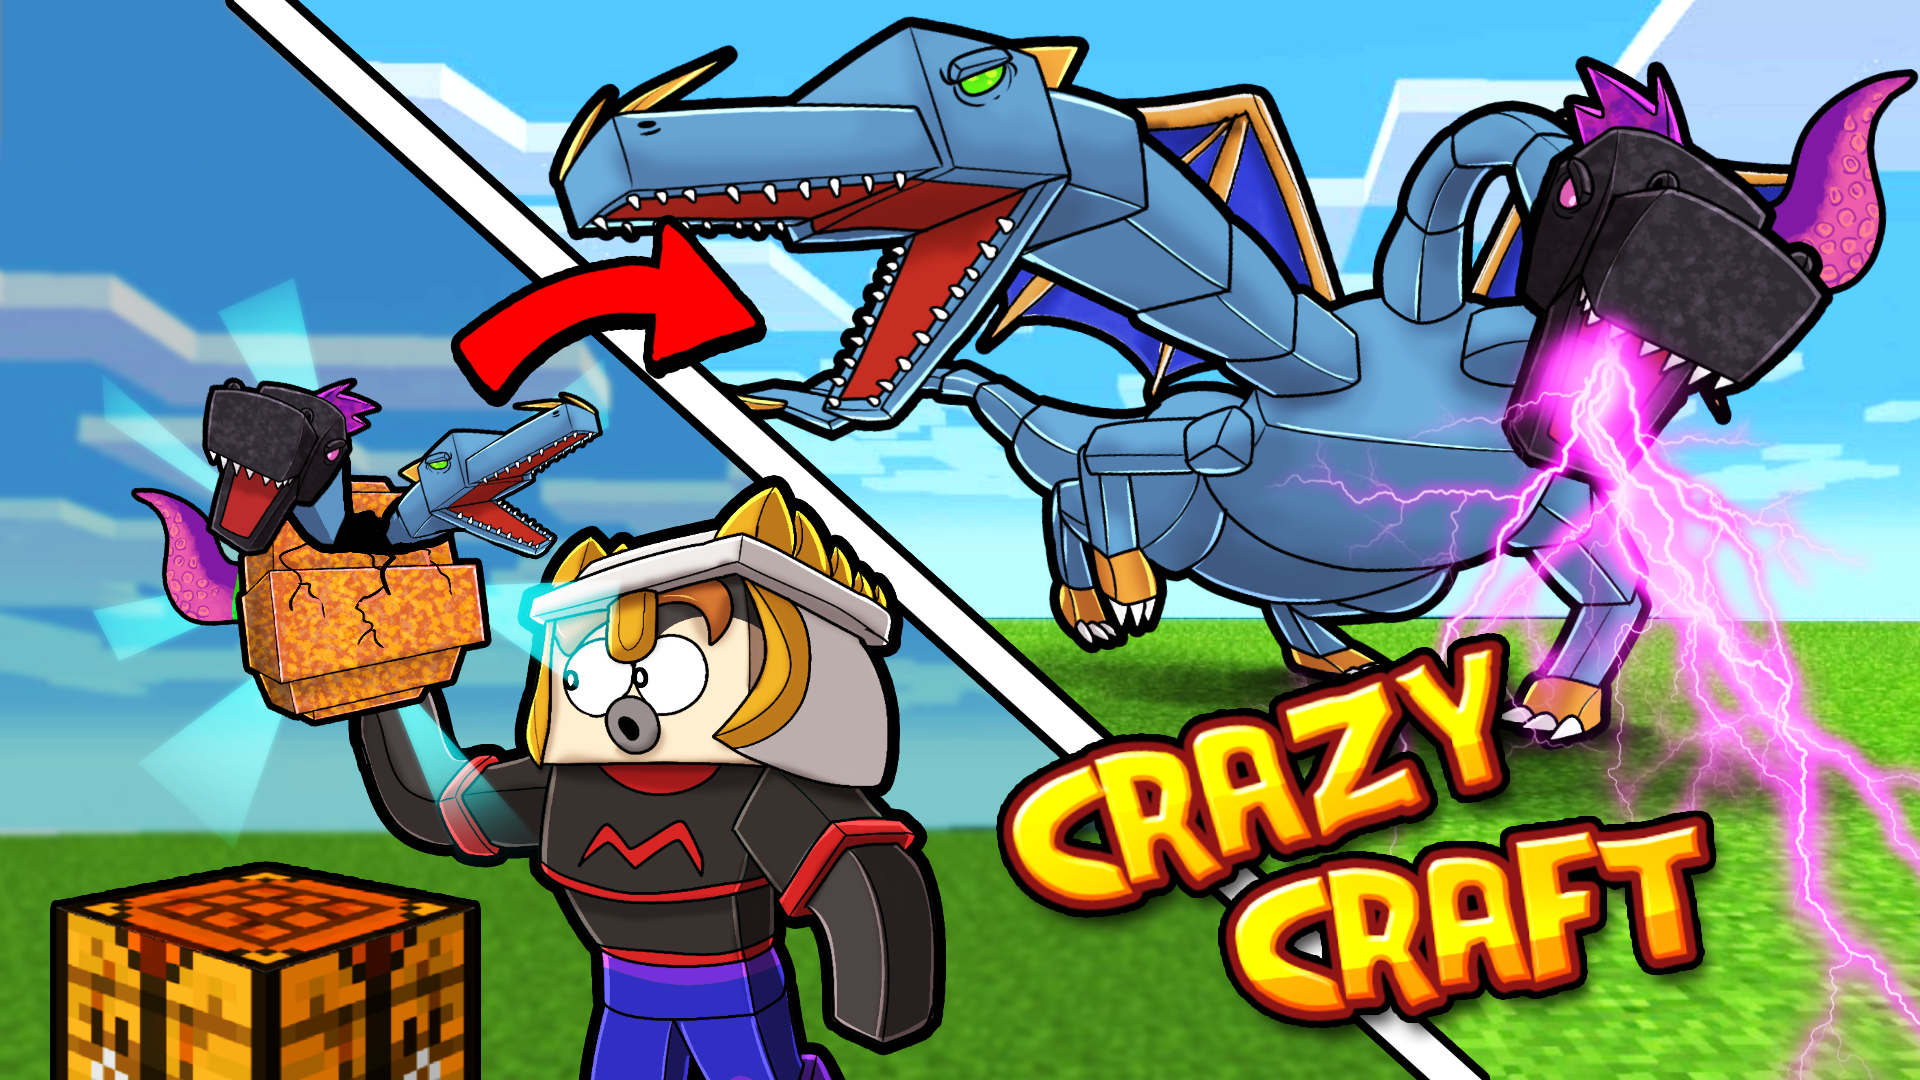 bal Likeur botsing Crazy Craft 4.0 [OFFICIAL] - VoidLauncher Home Page